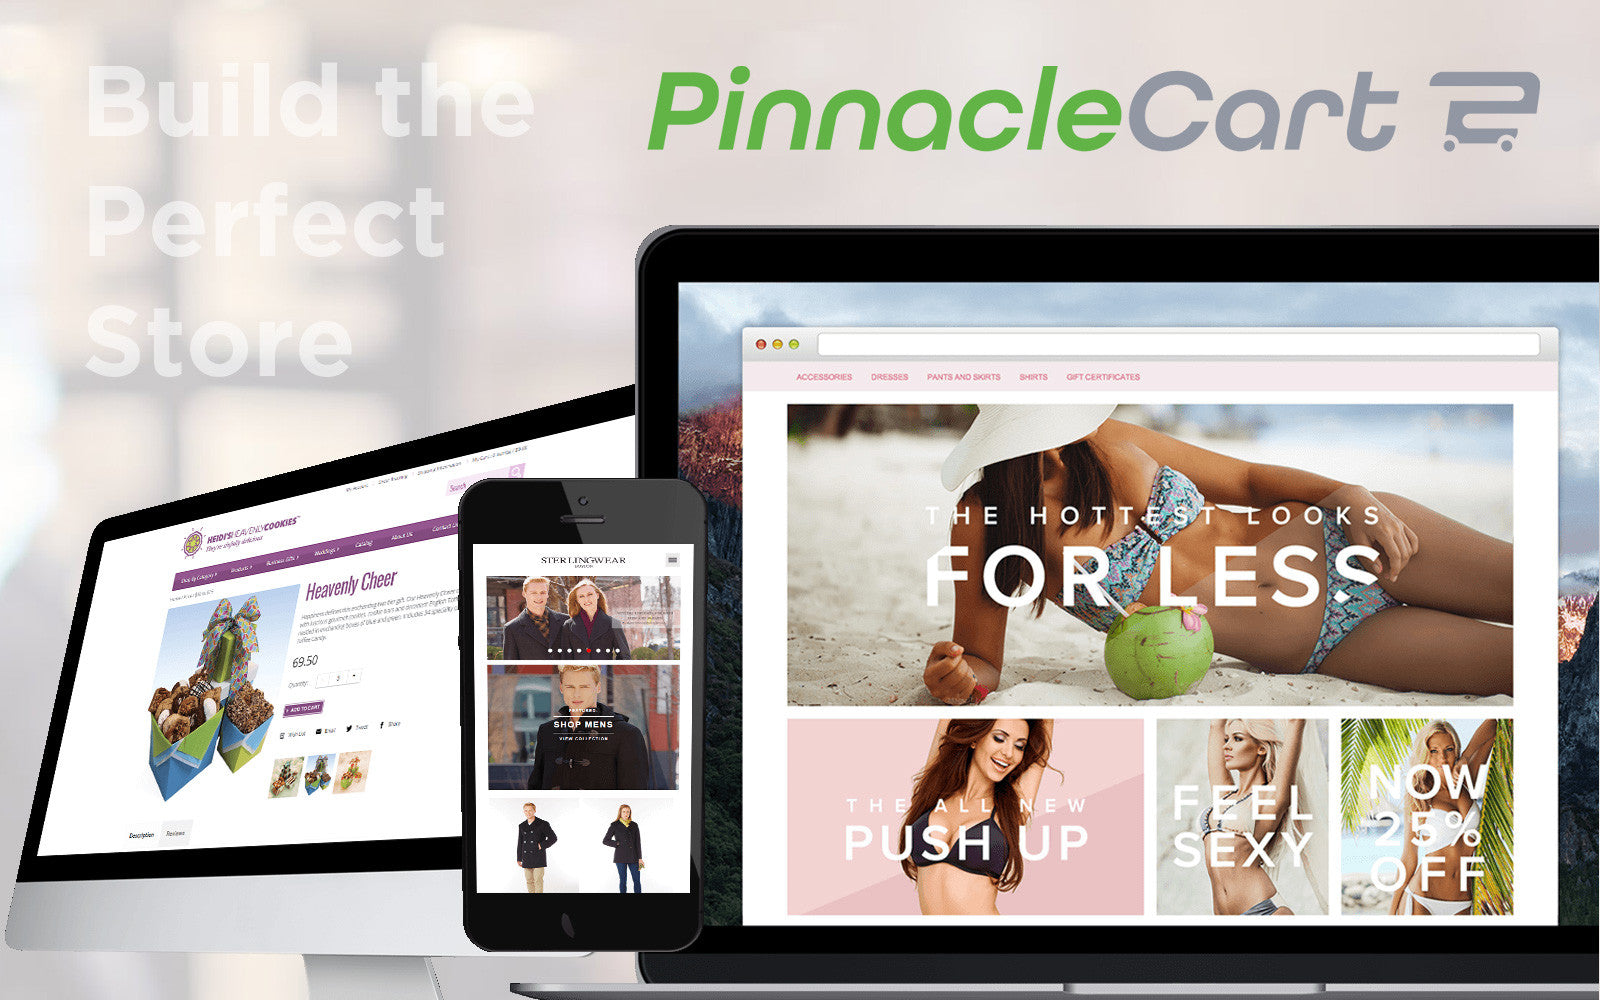 Pinnacle Cart in Review: Is It the Best for Your Business?